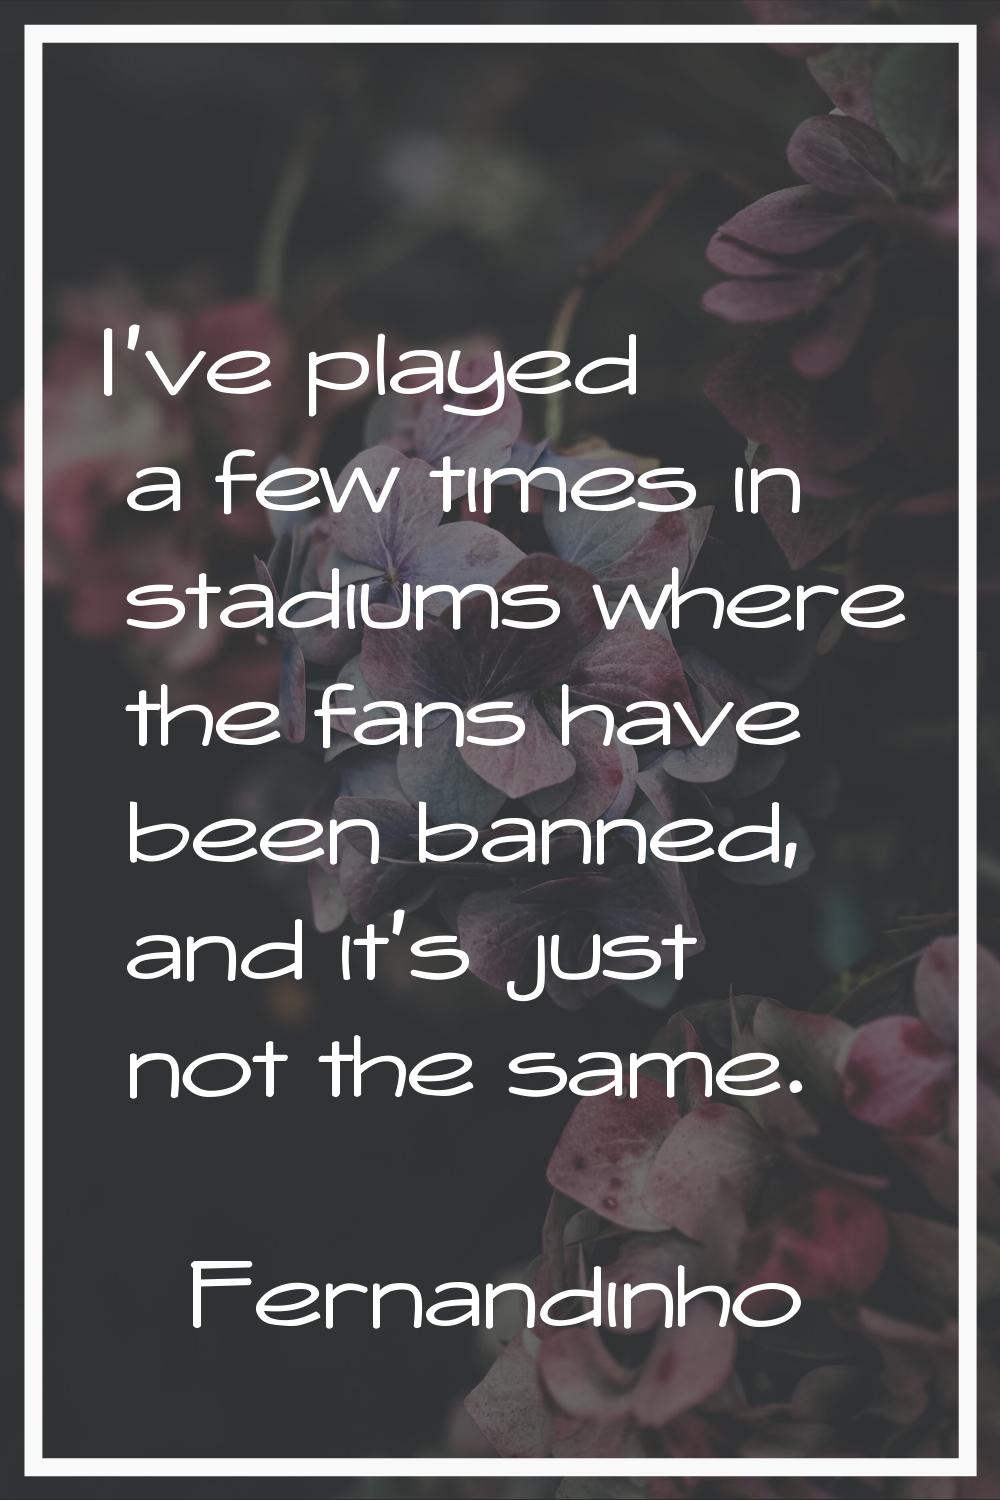 I've played a few times in stadiums where the fans have been banned, and it's just not the same.